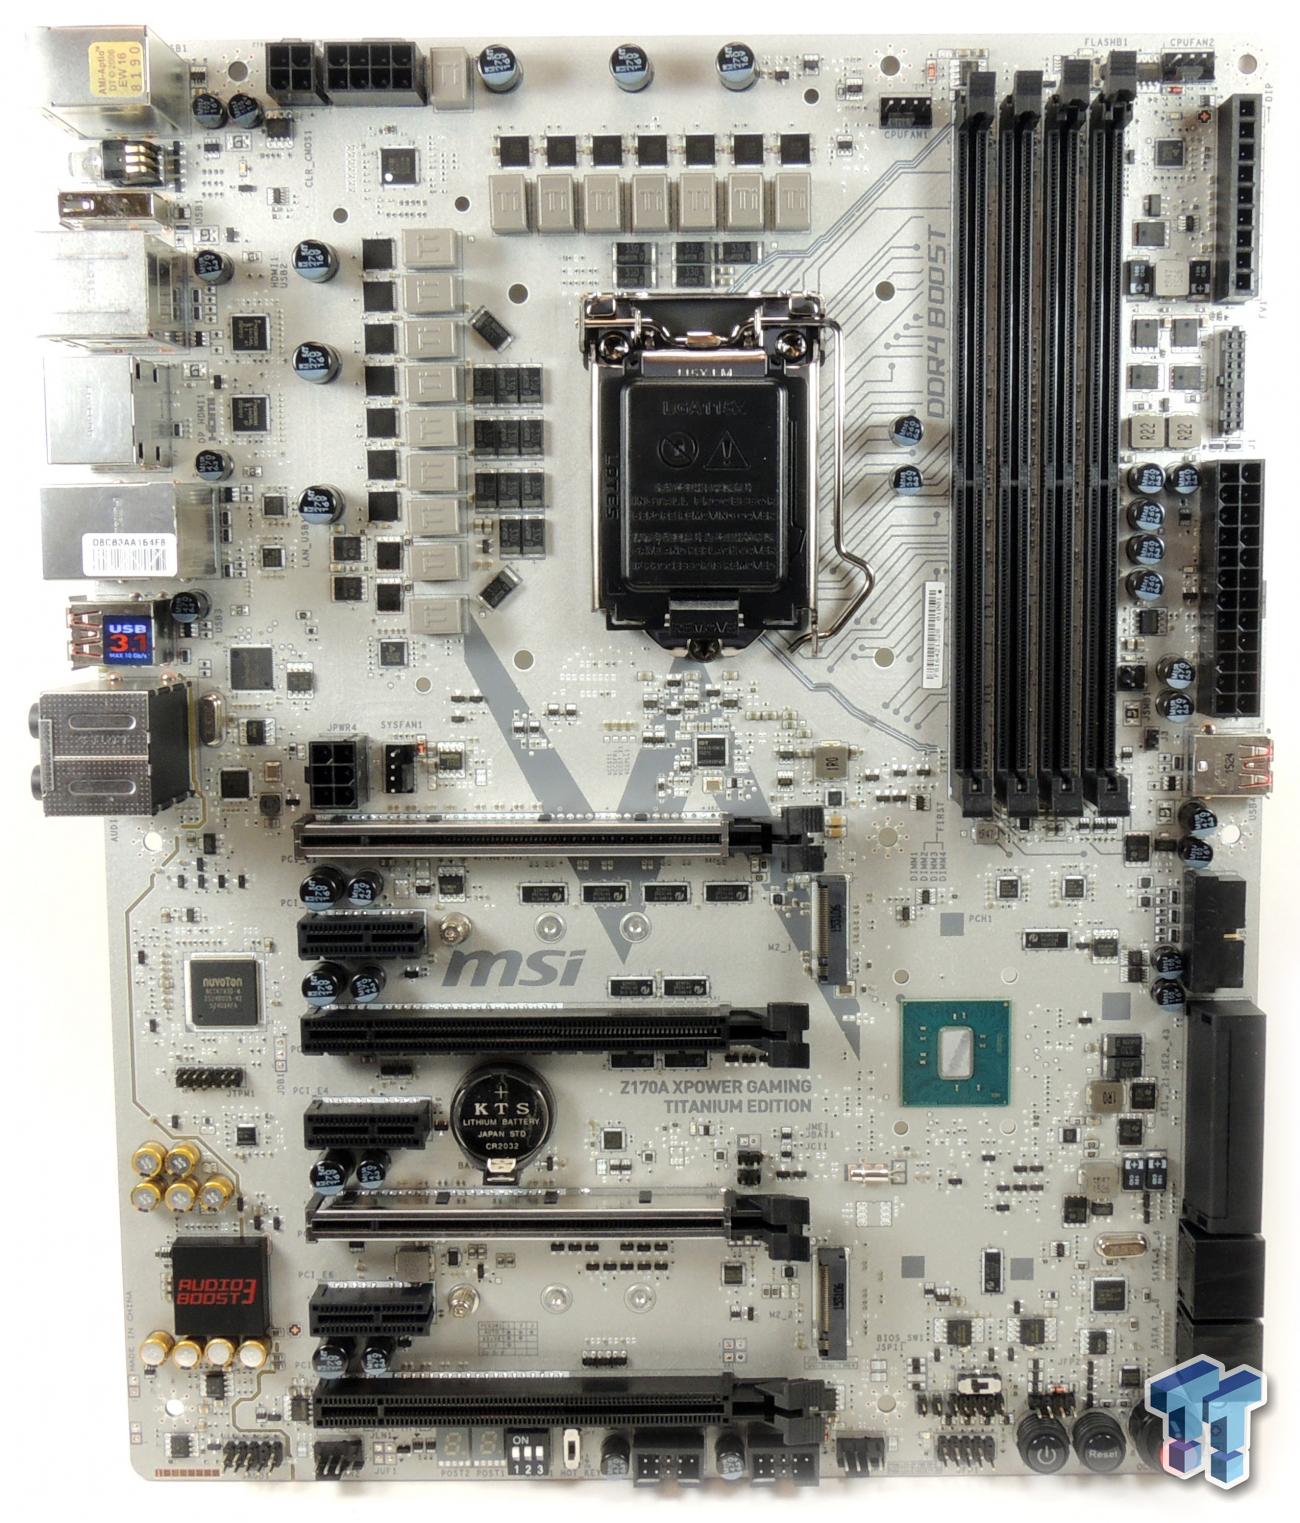 MSI Z170A XPOWER GAMING TITANIUM ED. (Intel Z170) Motherboard Review